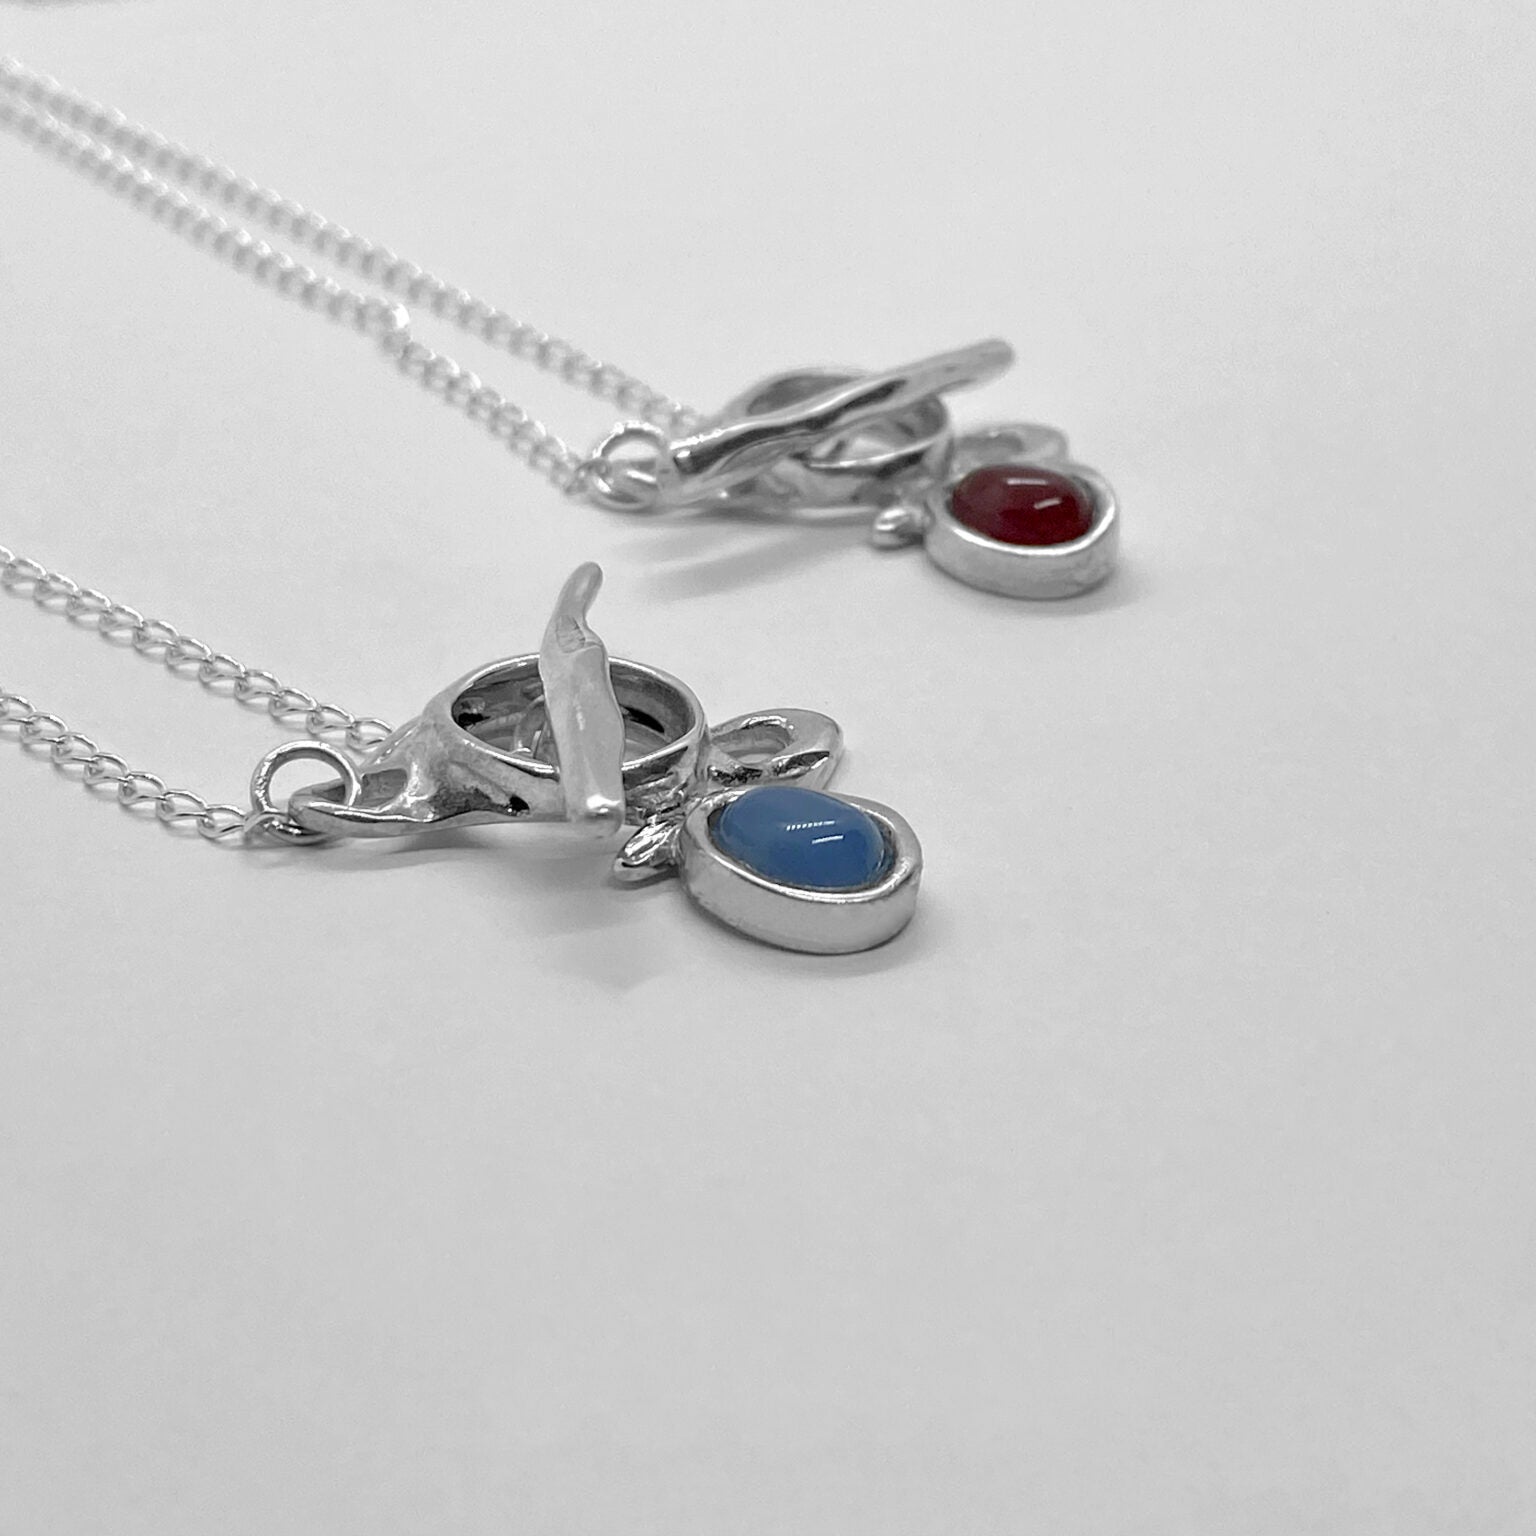 The Felicia necklace is a handmade piece made of 925 sterling silver. Its stone is semiprecious and comes in two colors: red carnelian and blue agate. The clasp is located on the front side and is smooth and glossy. In the photograph, the length of the chain is 40 cm.